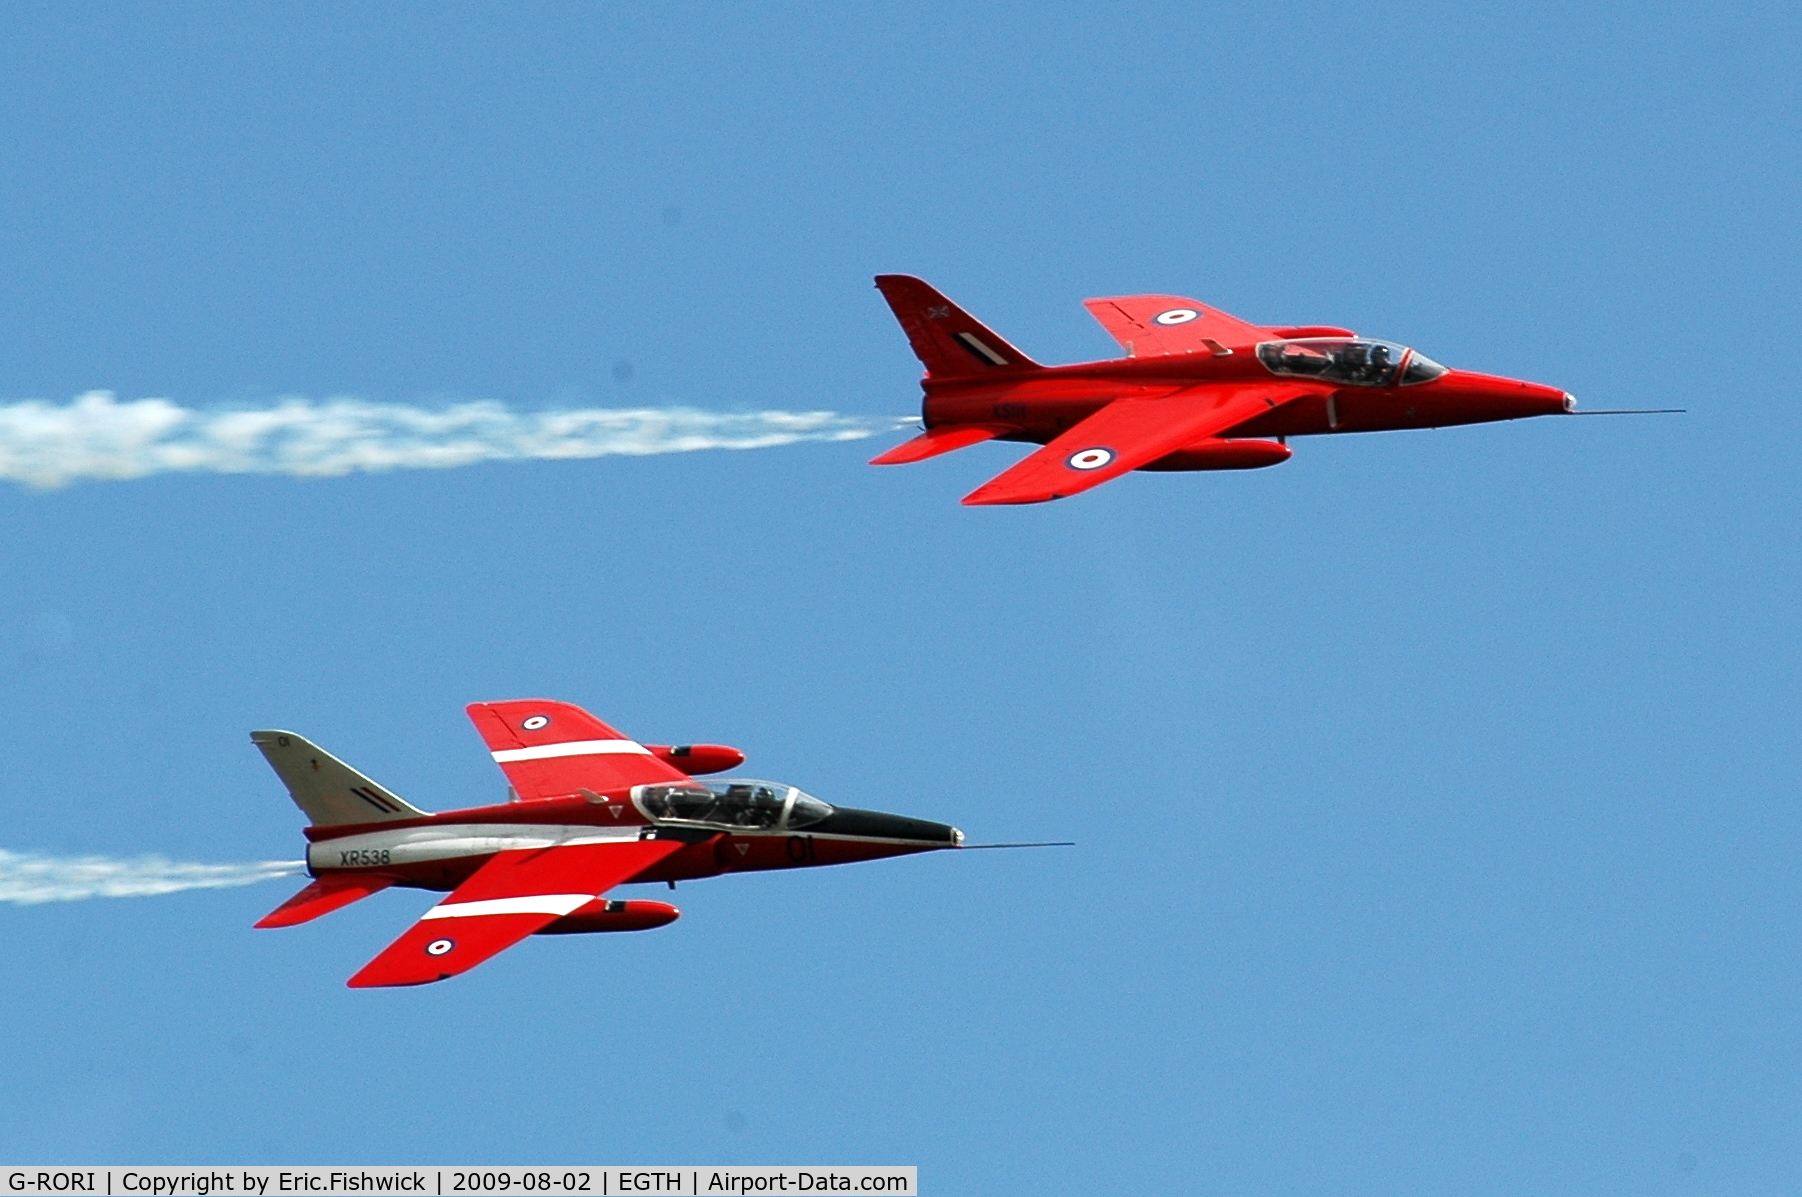 G-RORI, 1963 Hawker Siddeley Gnat T.1 C/N FL549, Two Folland Gnat T1 Trainers at Shuttleworth Military Pagent Air Display  Aug 09